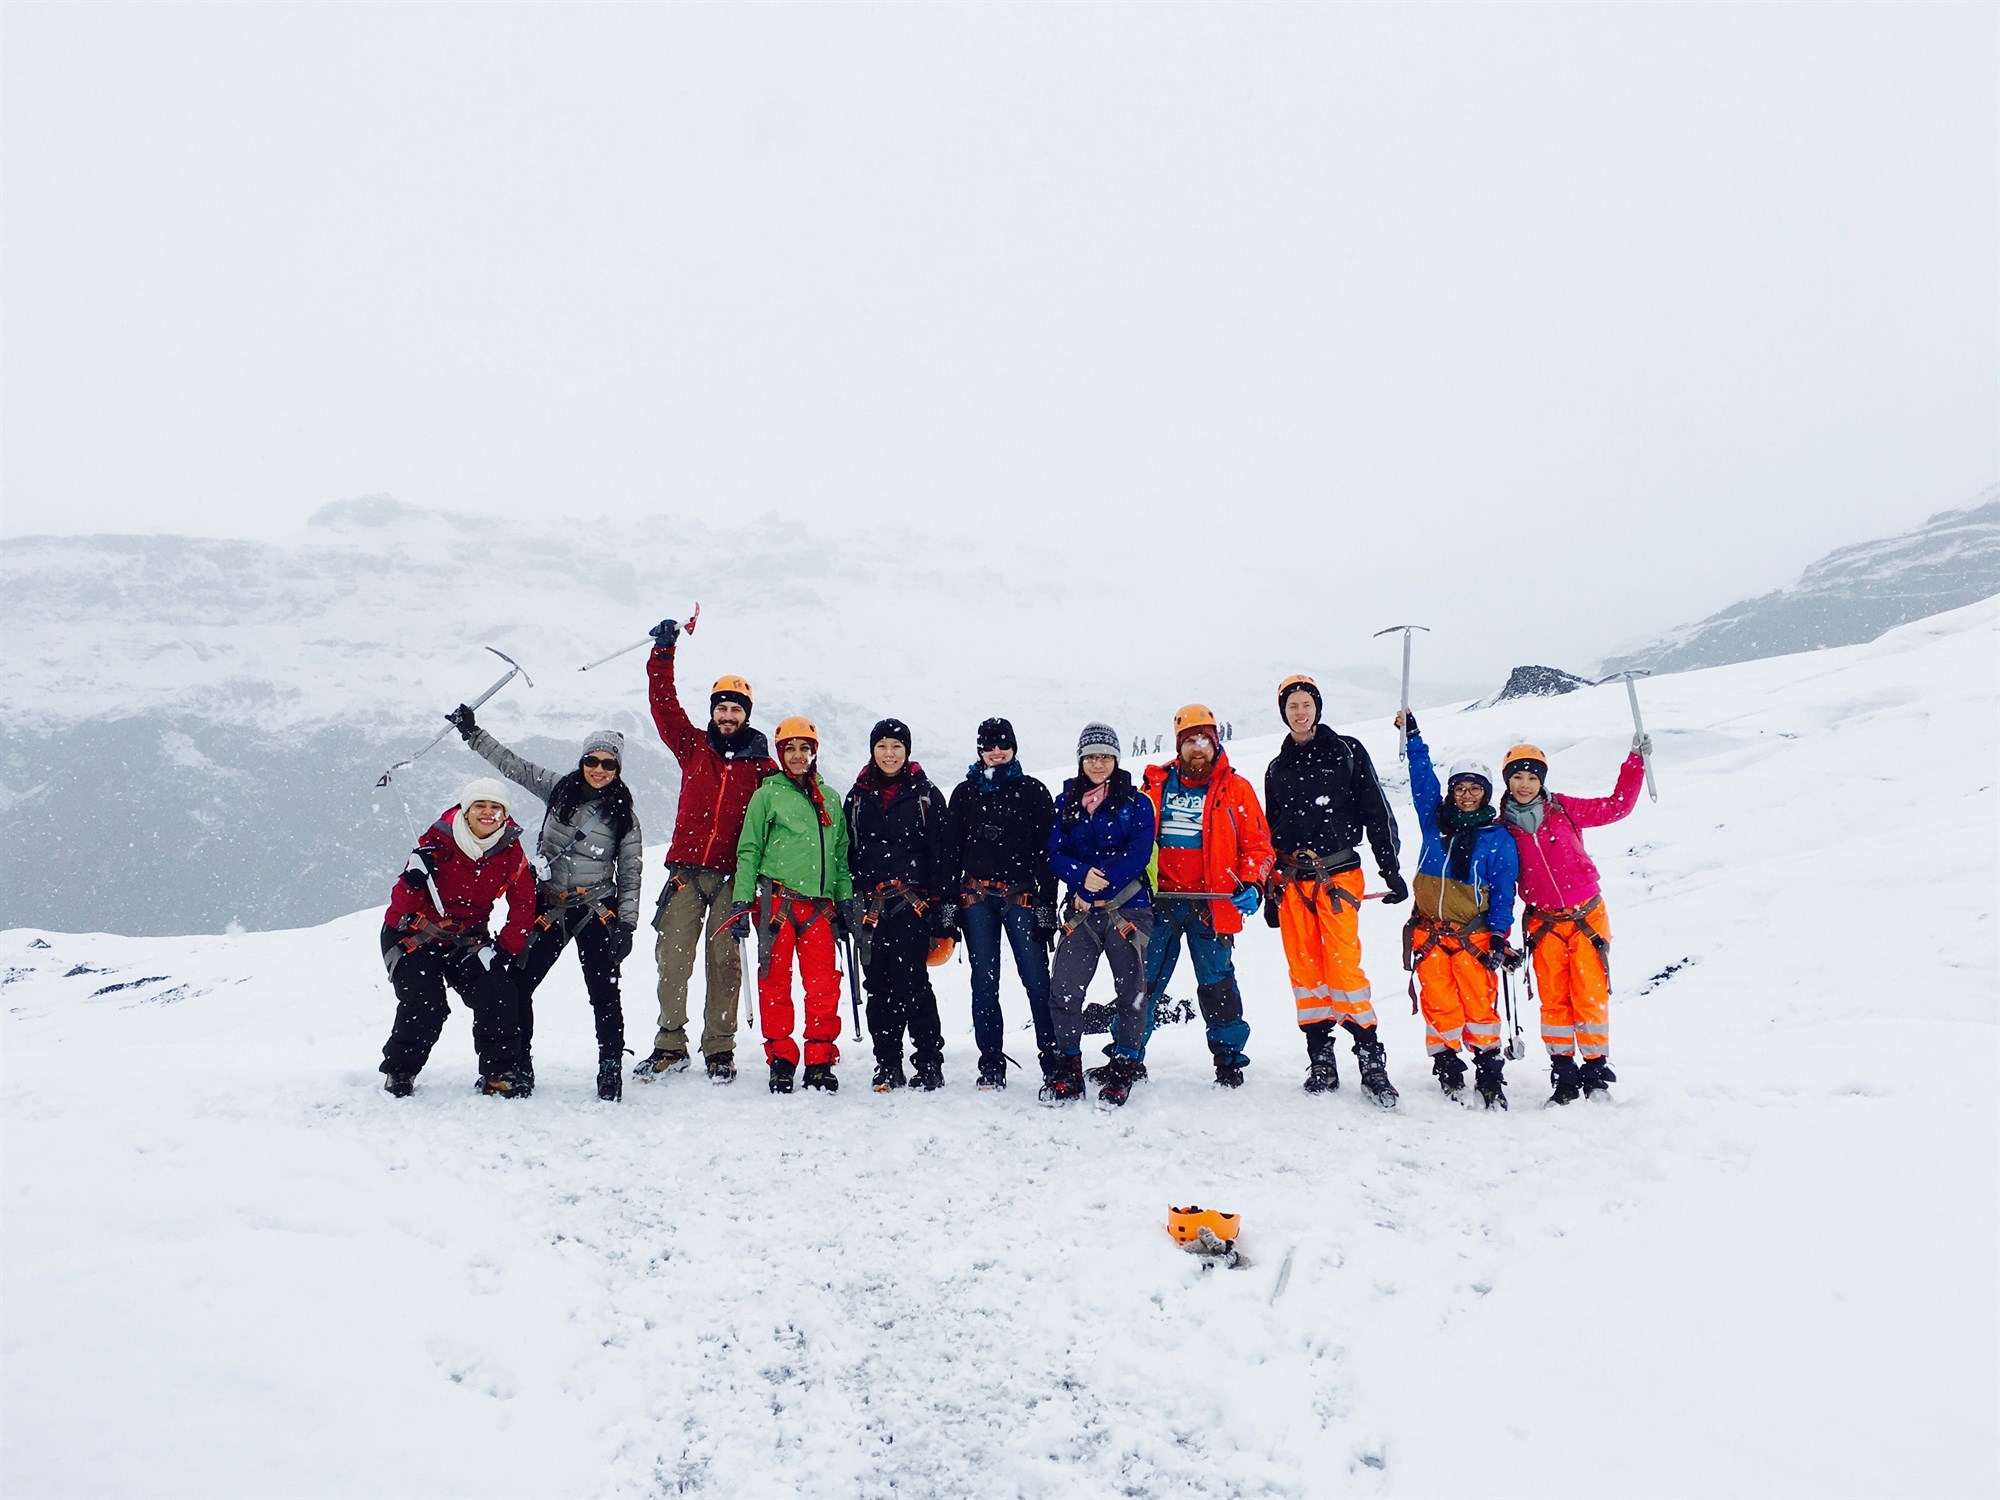 Group of people stood on a snowy mountain